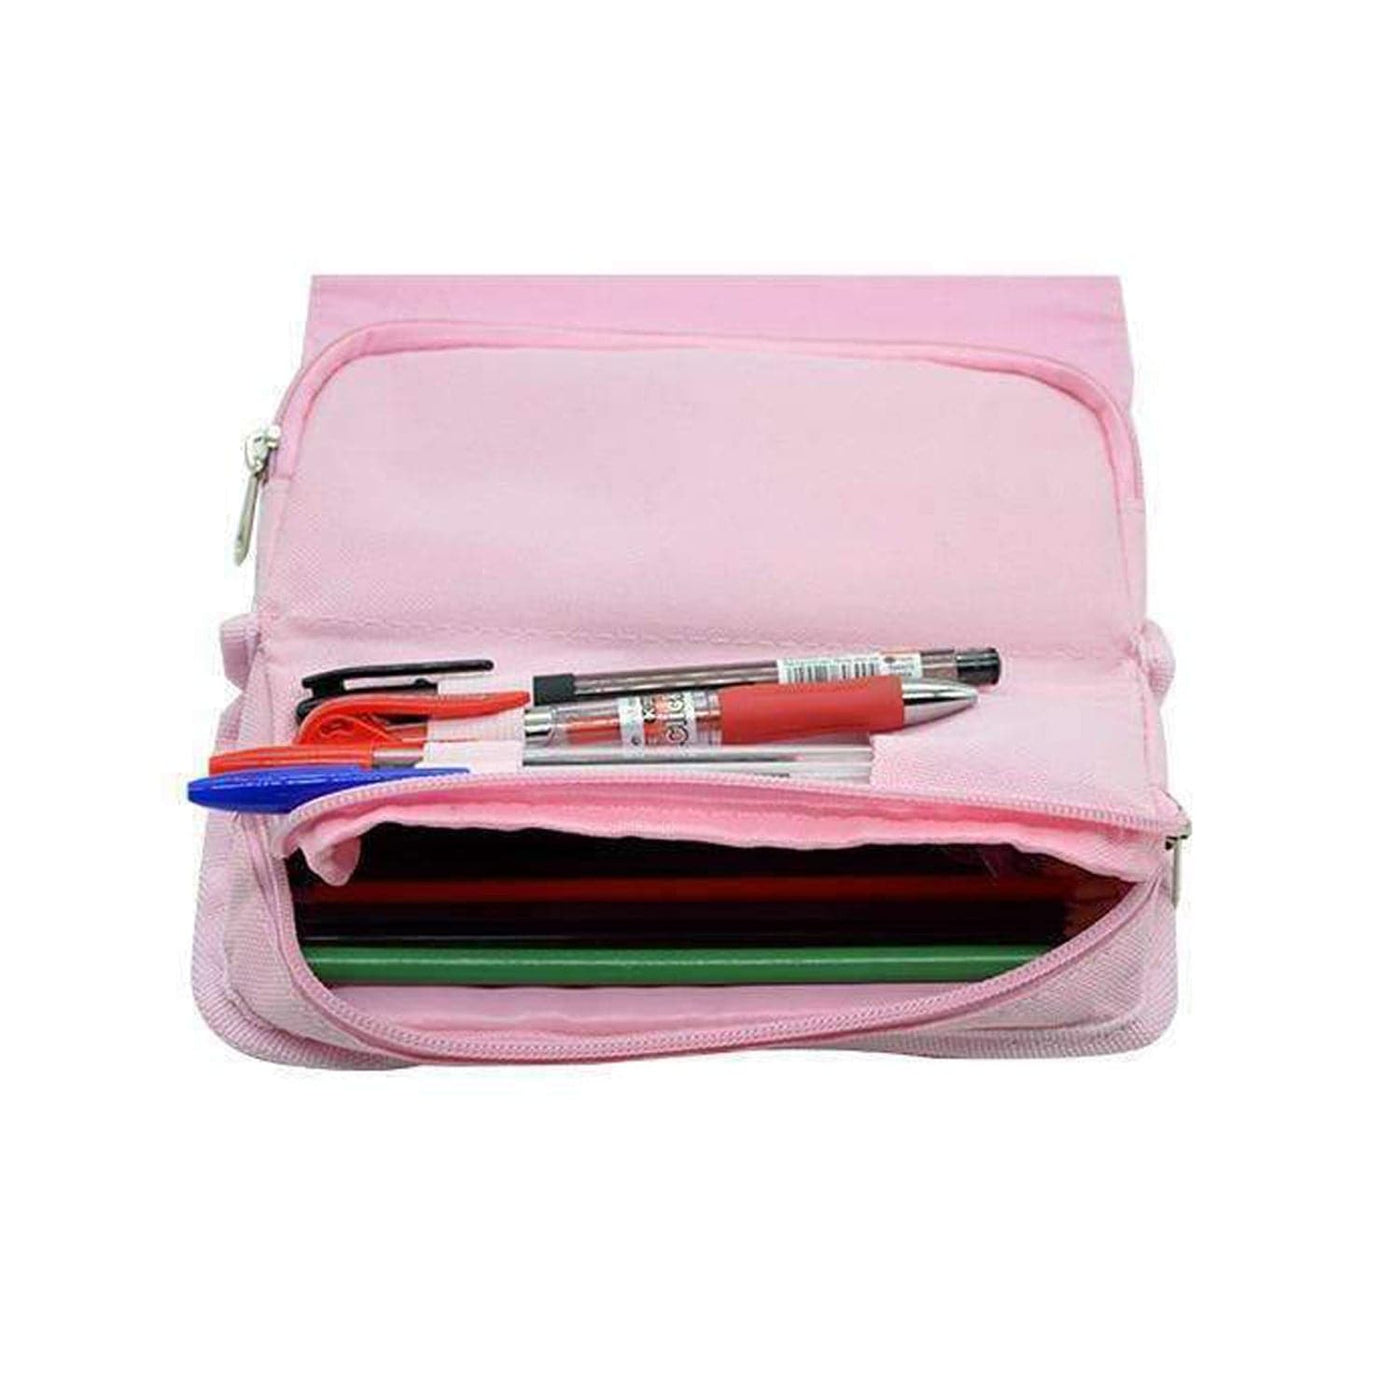 Once Upon A Time There Lived A Princess - Personalised Disney  Pencil Case